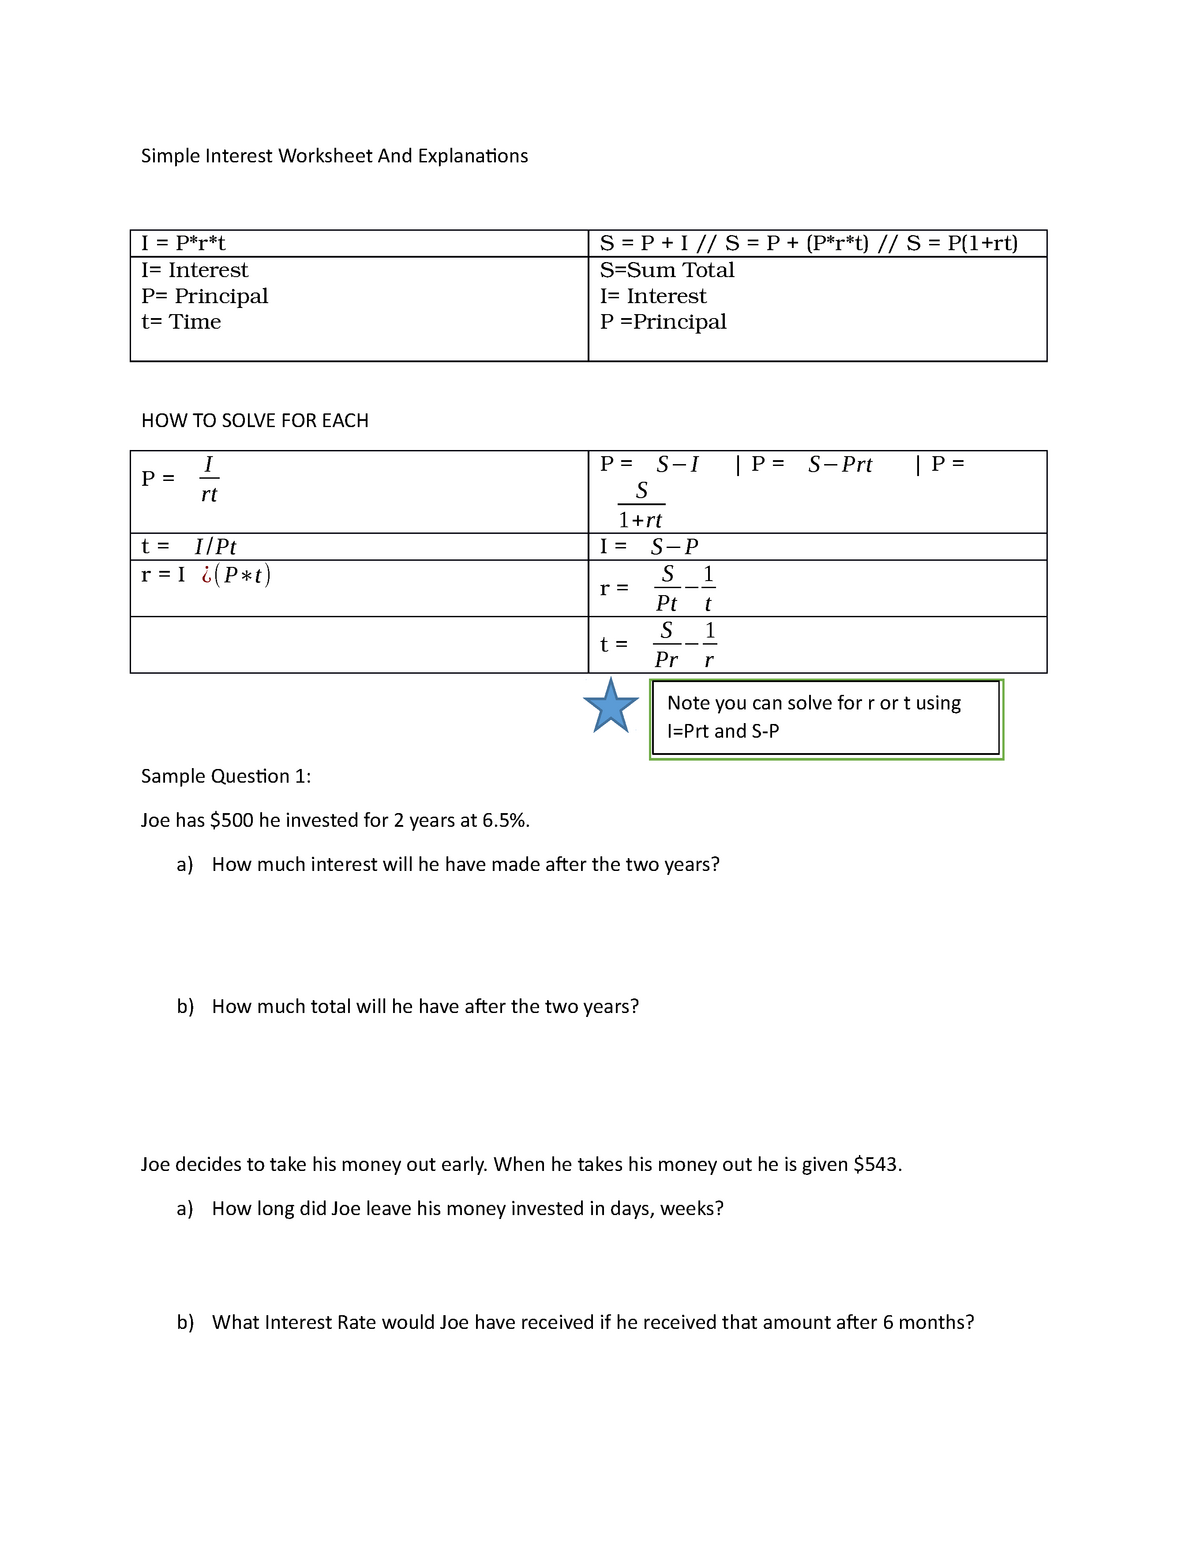 simple-interest-worksheet-and-explanations-a-how-much-interest-will